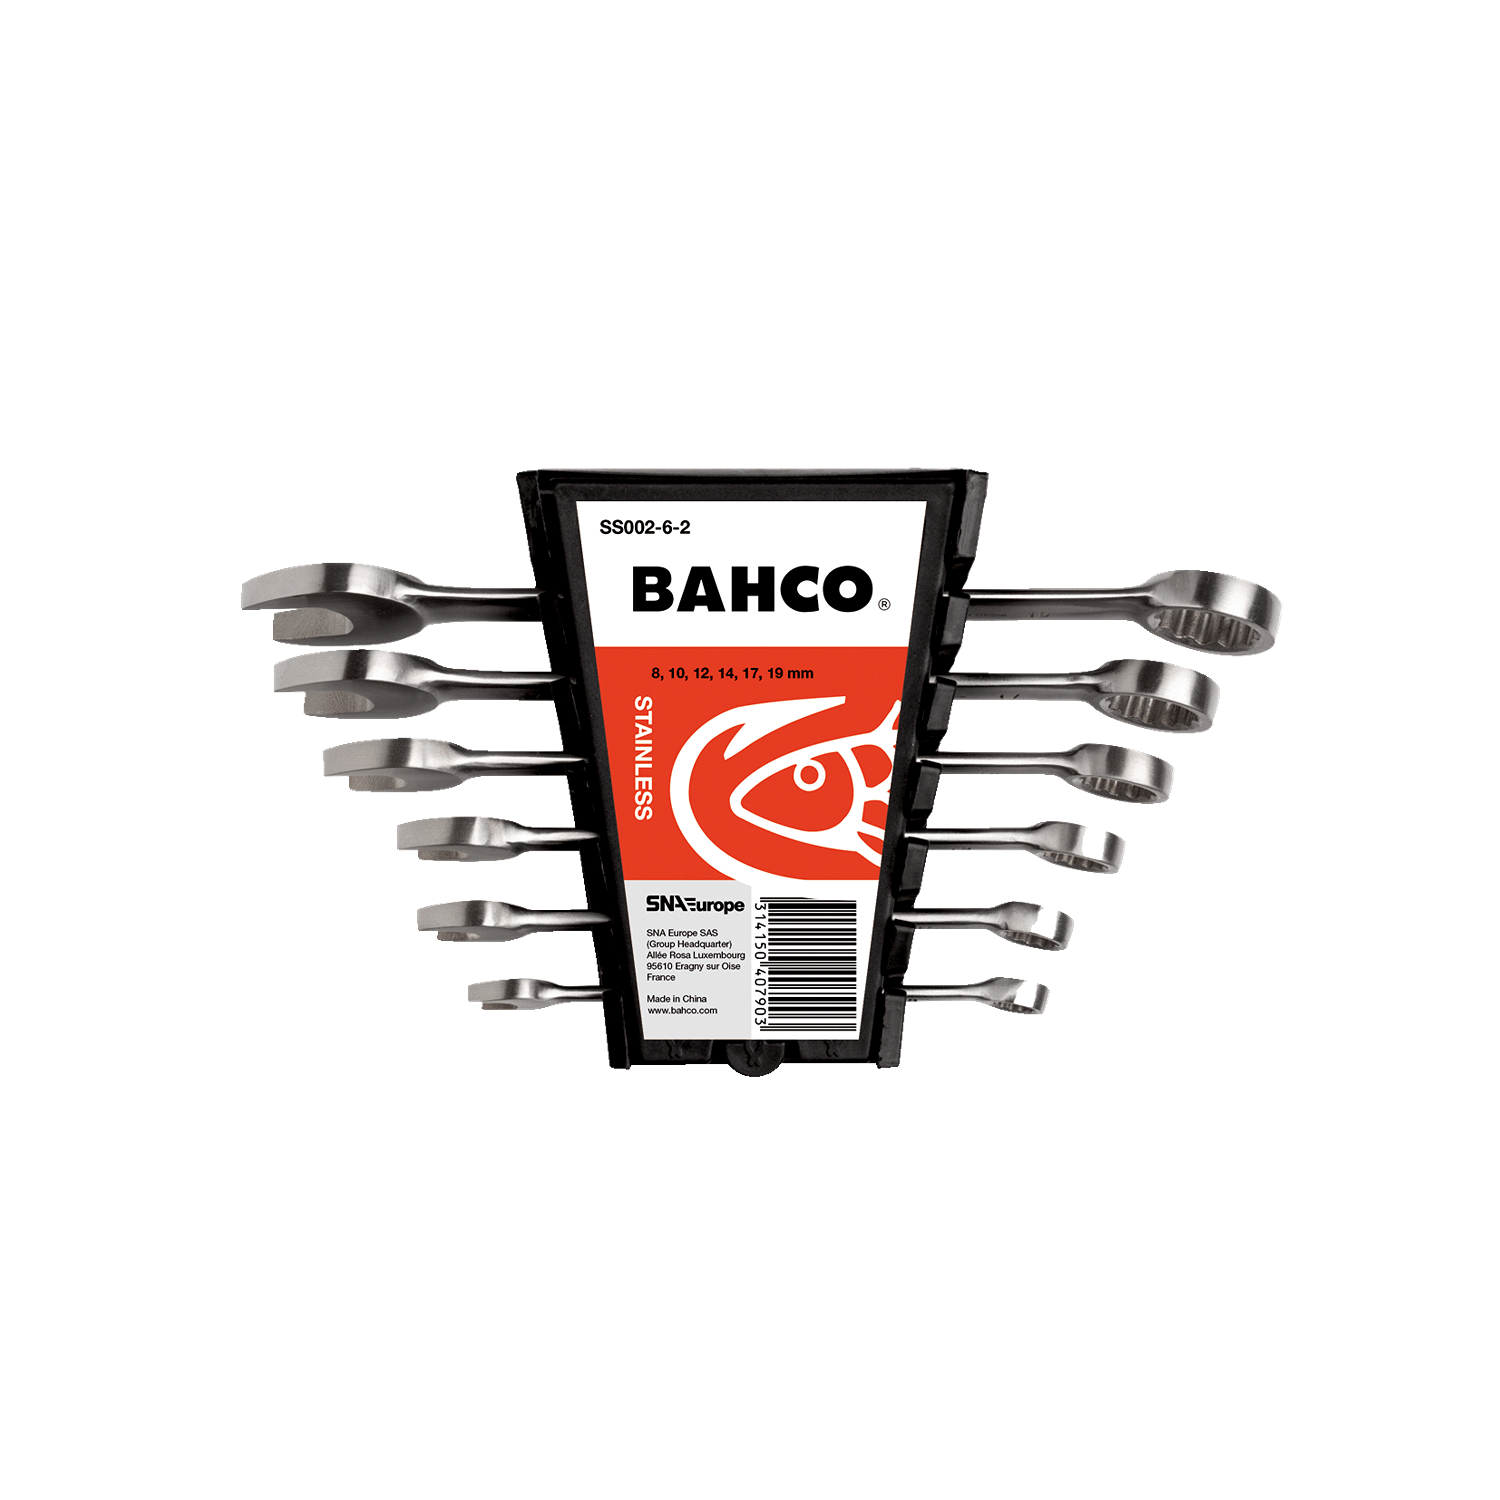 BAHCO SS002-6-2 Stainles Steel Combination Wrench (BAHCO Tools) - Premium Combination Wrench from BAHCO - Shop now at Yew Aik.